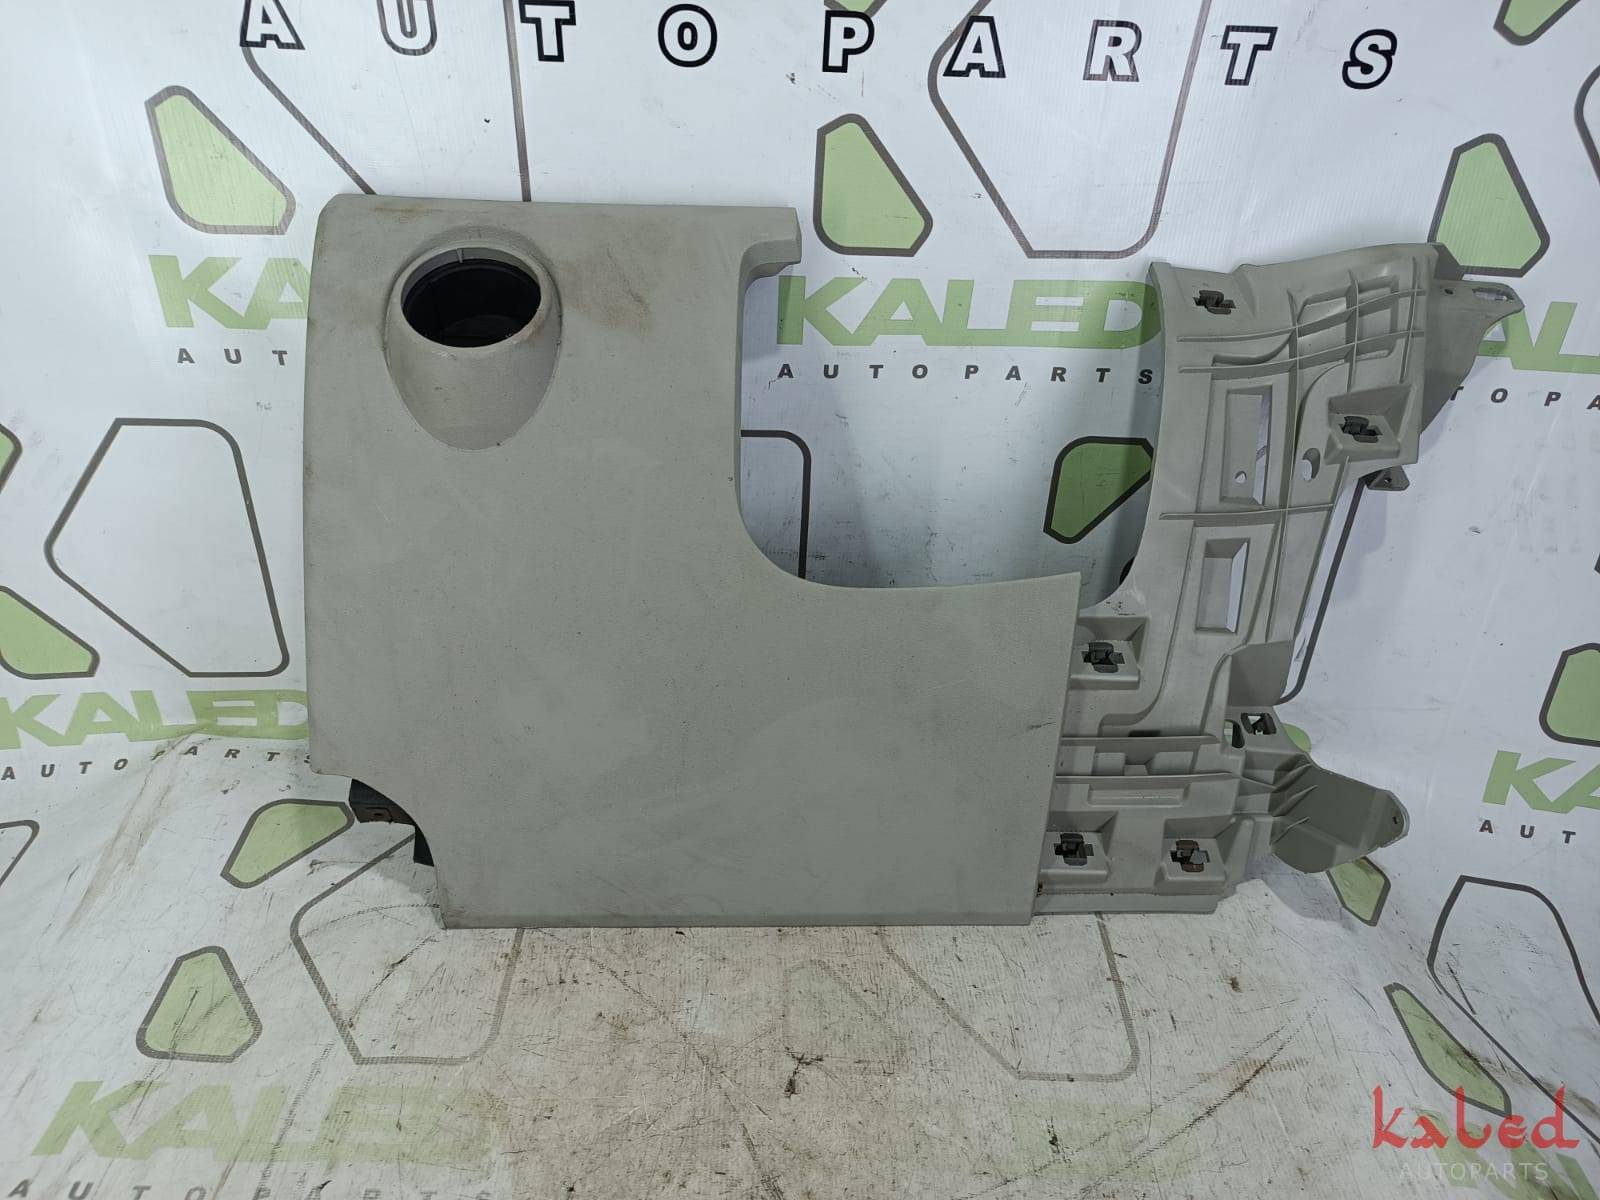 Tampa Inferior Painel VW UP TSI 2016 - Kaled Auto Parts